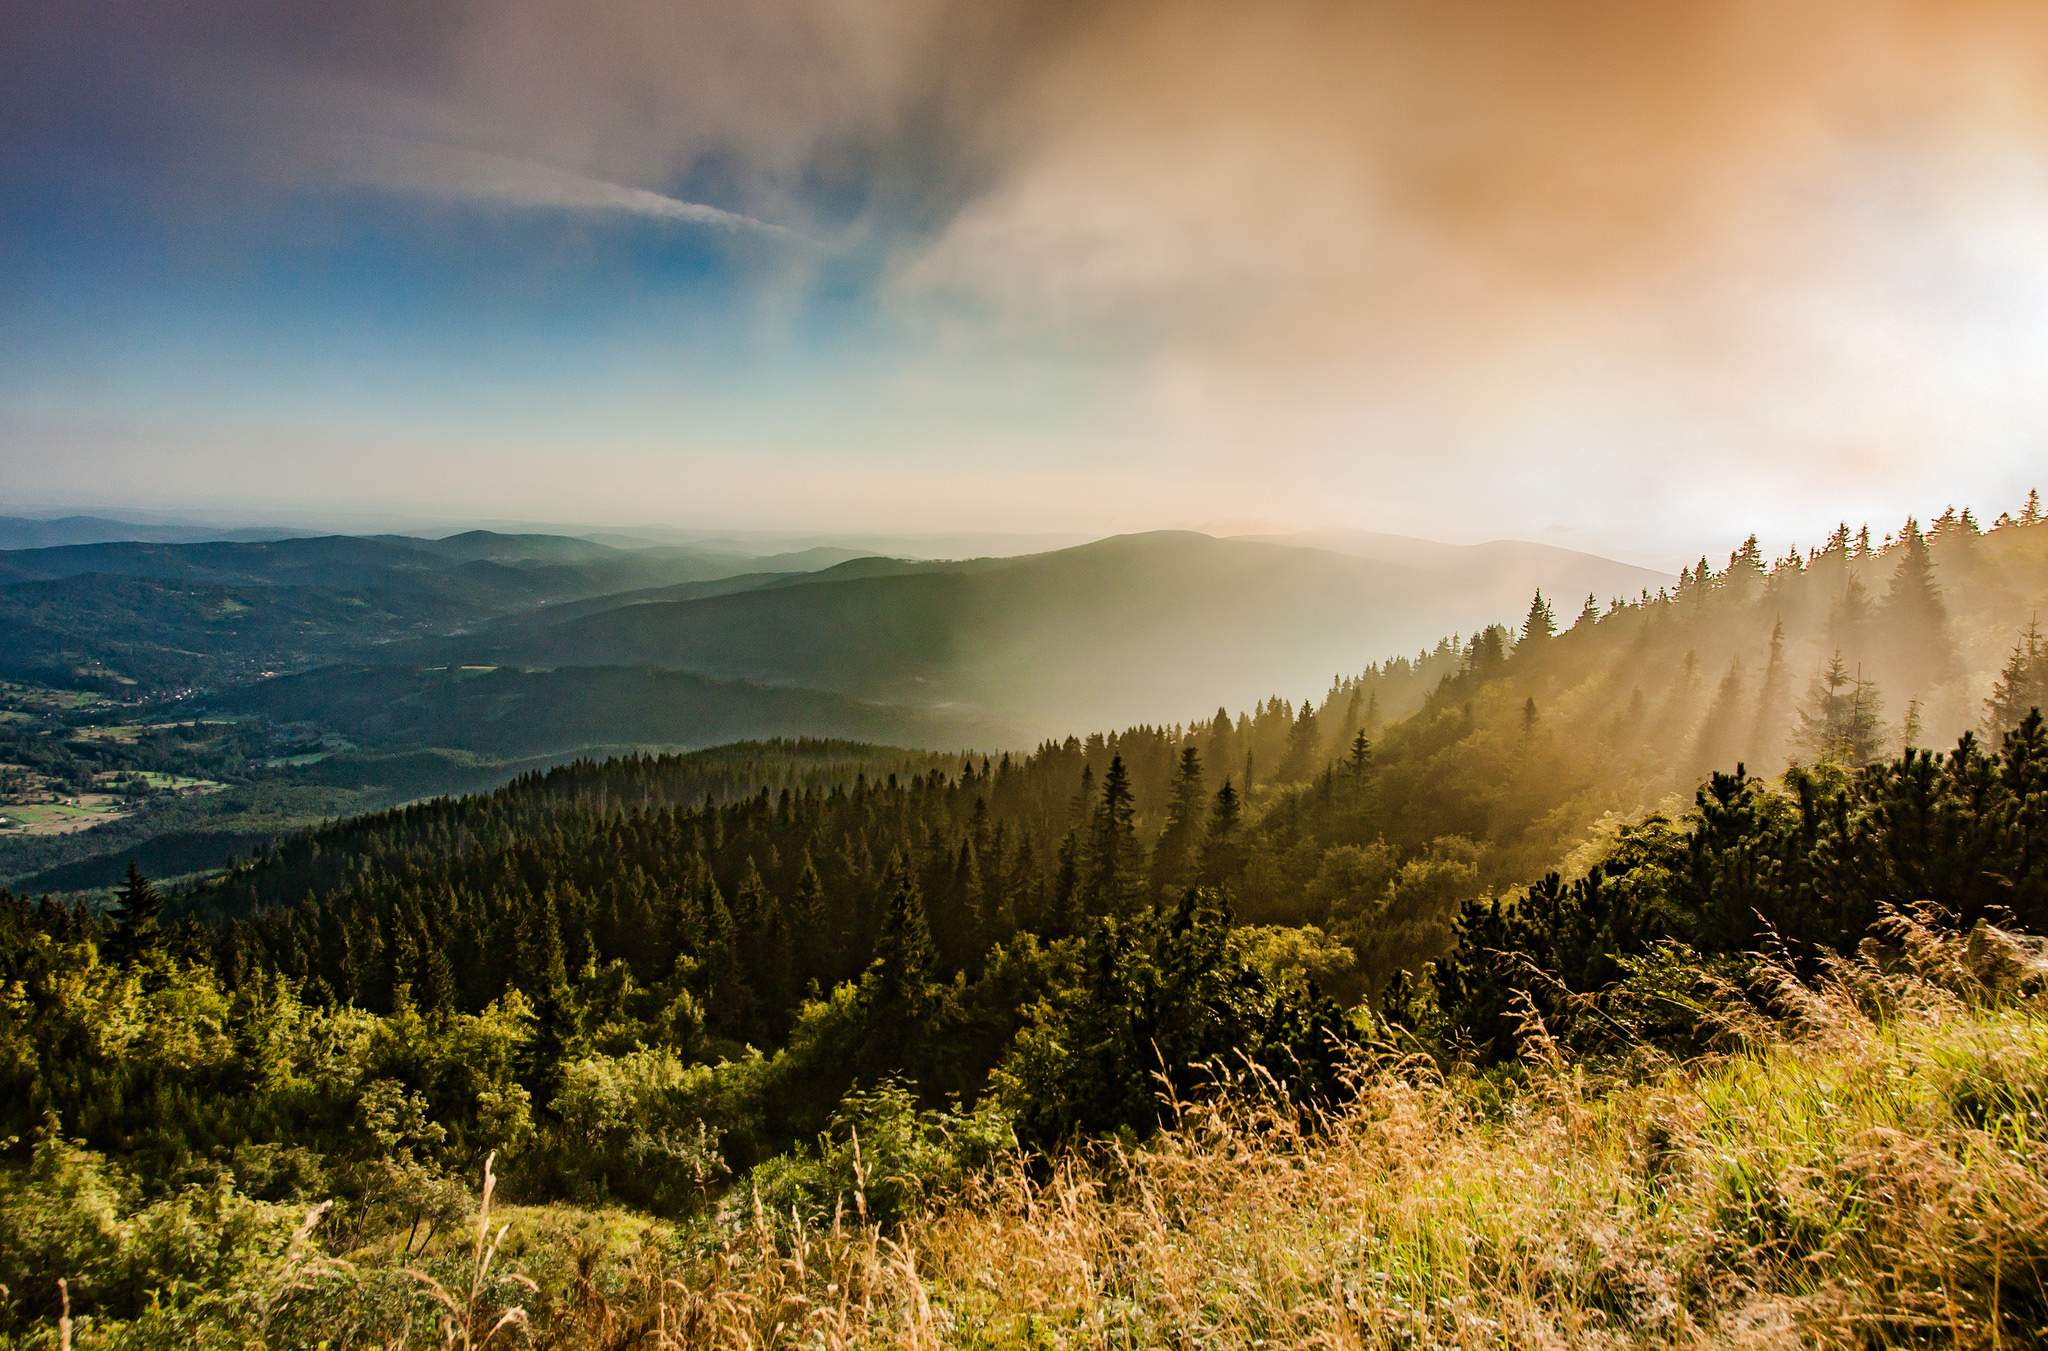 A scenic view from Przełęcz Brona pass. Beautiful colors and light play